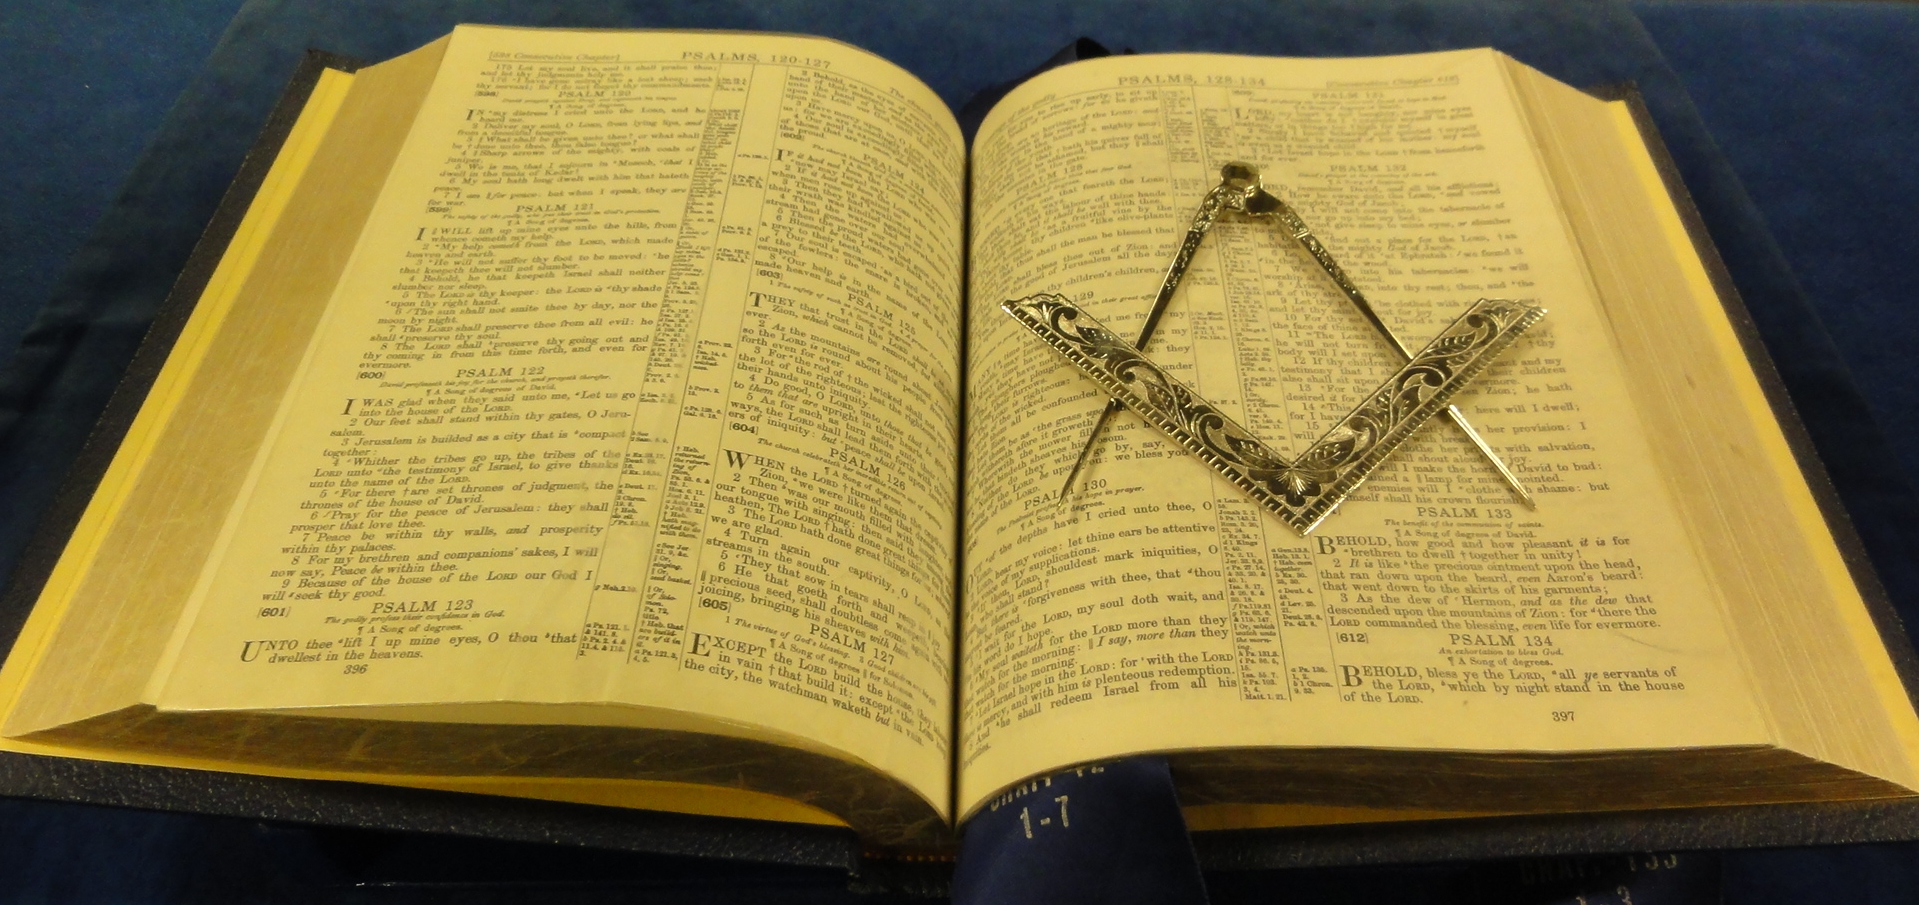 Holy Bible, Square, and Compass, arranged for the first degree on Psalm 133.